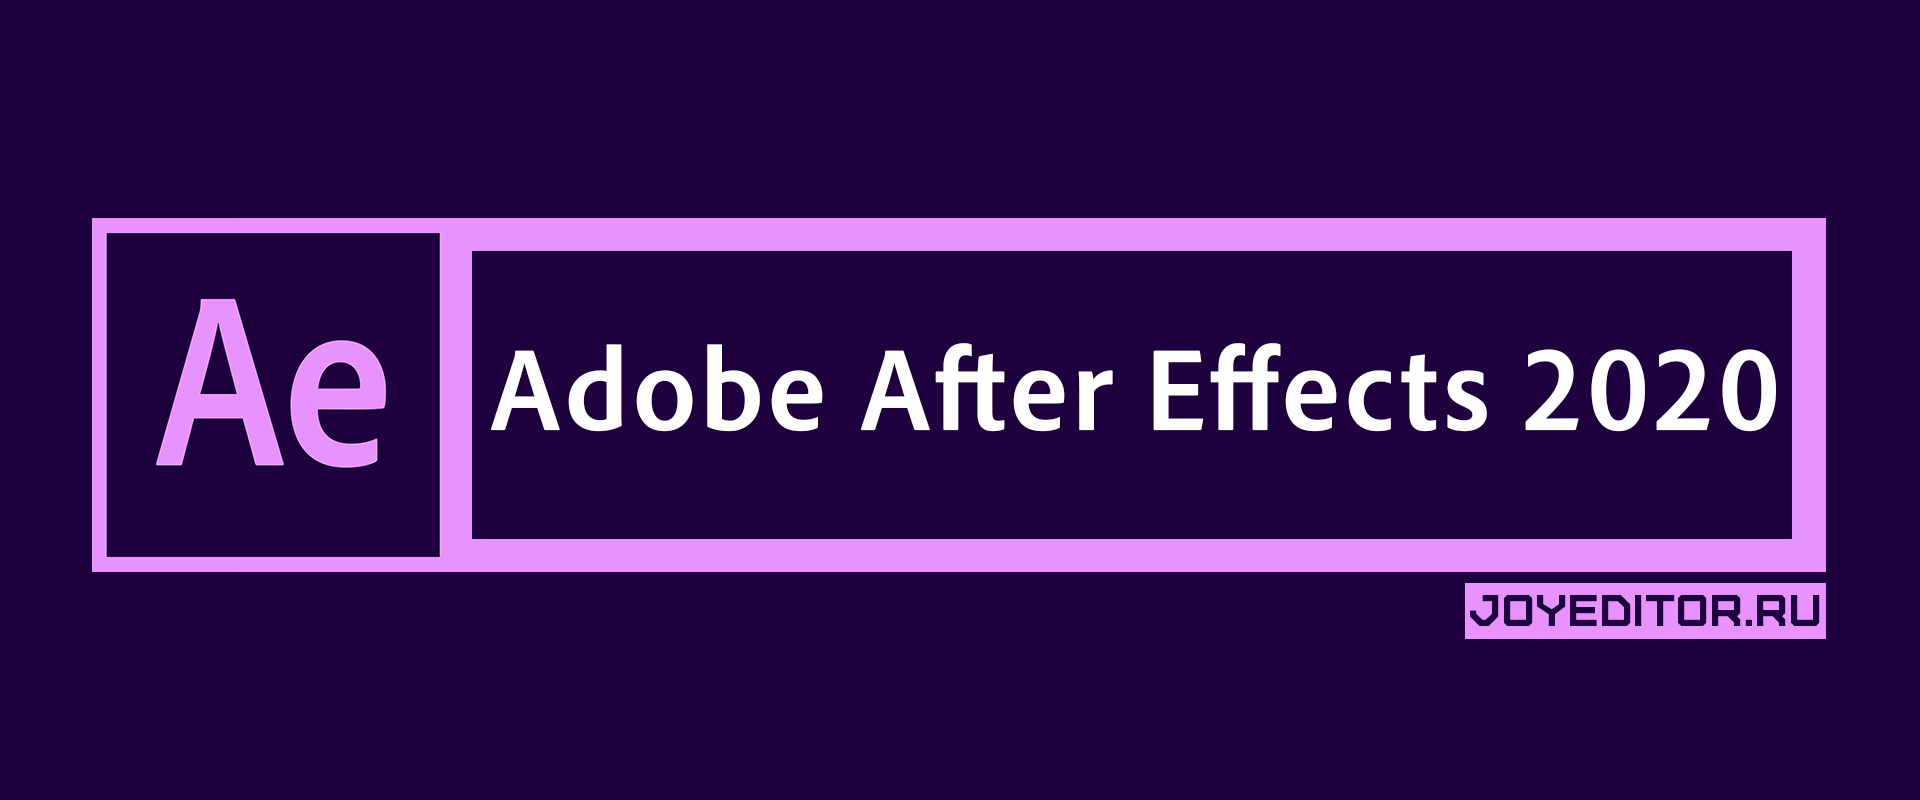 Adobe After Effects 2020 (17.0.3.58)